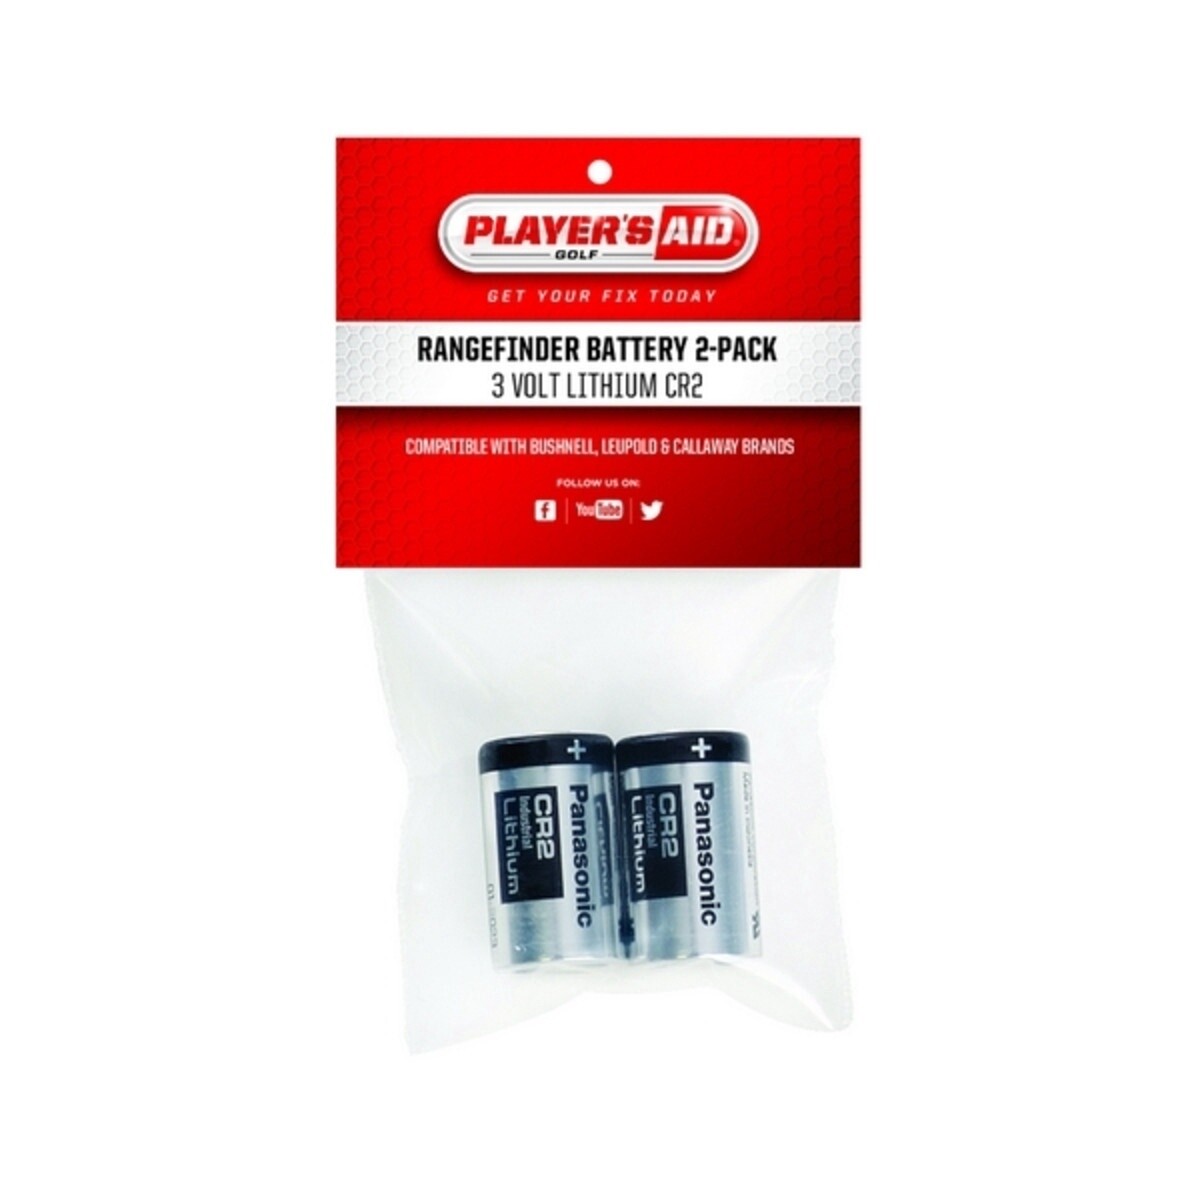 Players Aid Range Finder Batteries 2 Pack